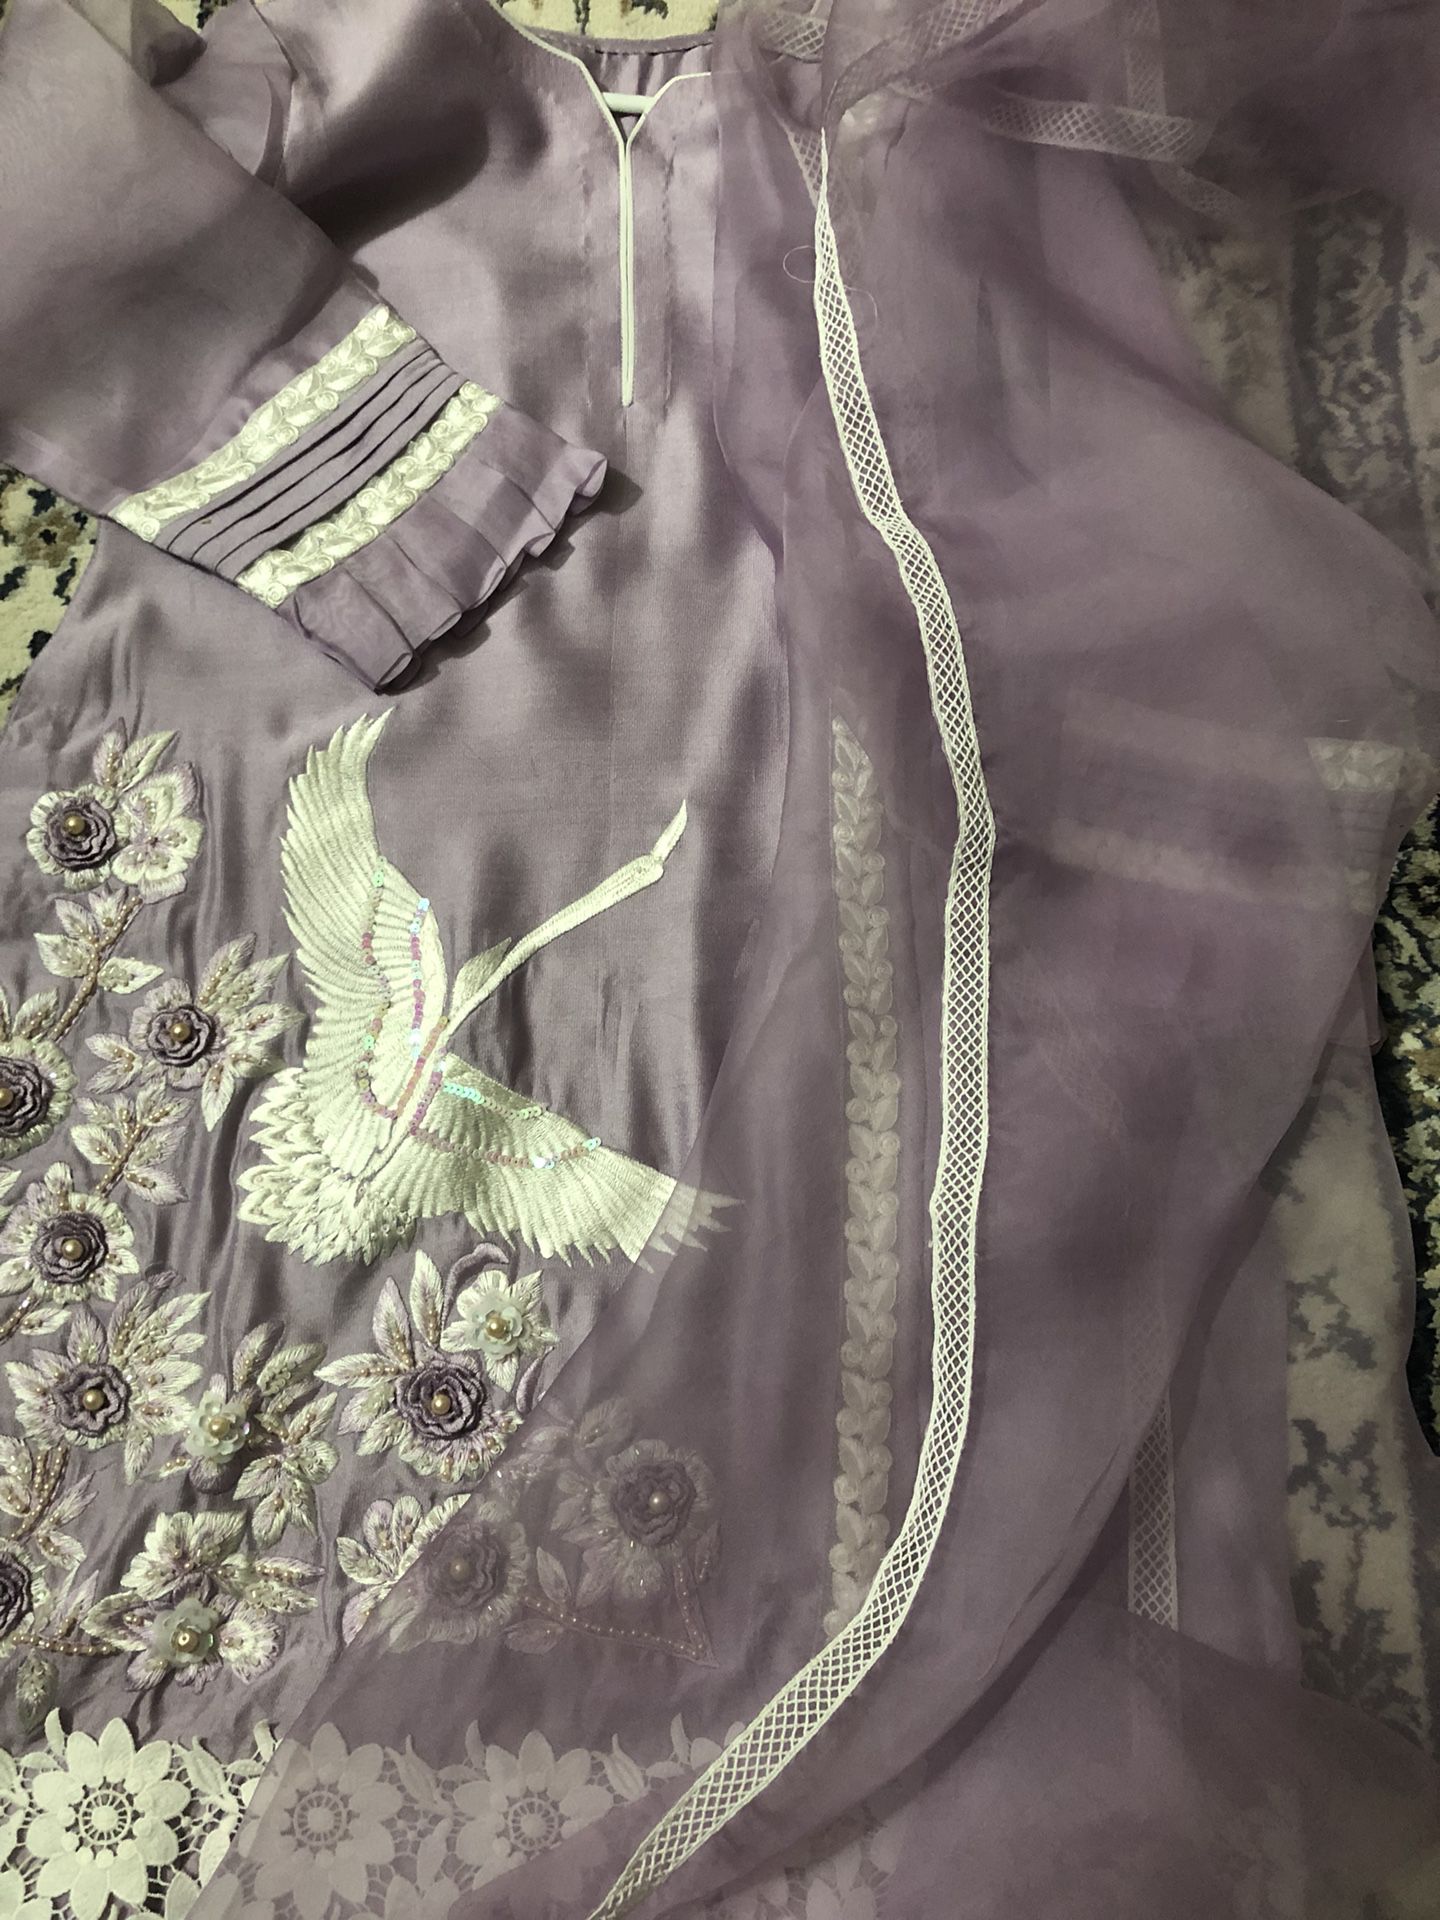 Eid outfit Lilac shirt and dupata!